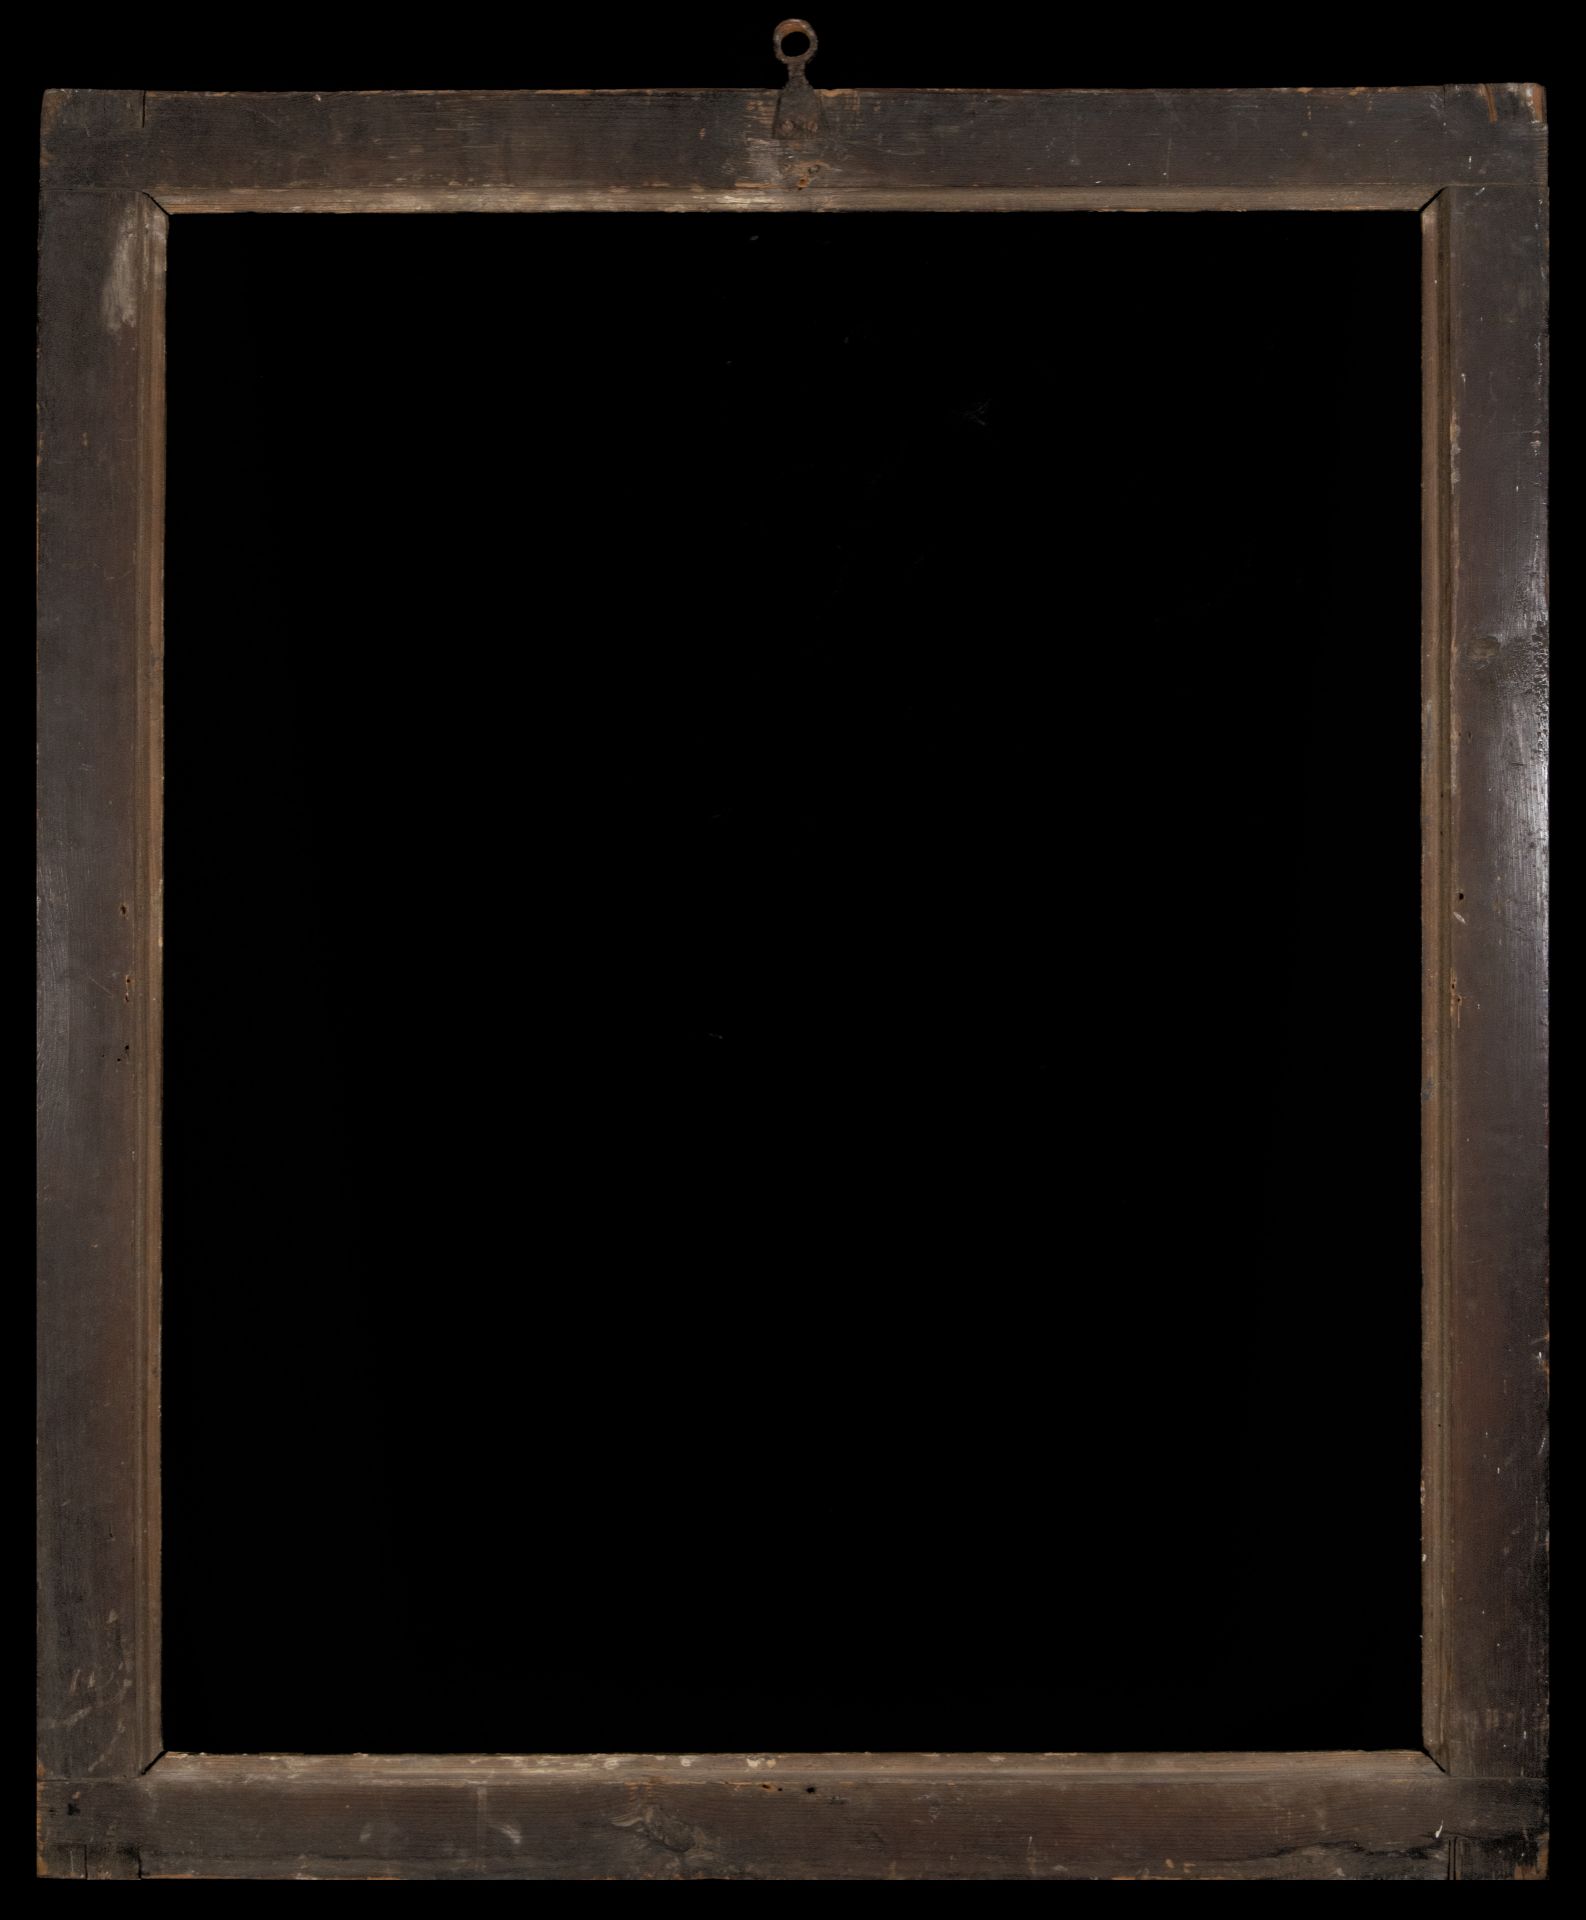 Spectacular antique sgraffito frame from the 16th century Hispanic Flemish from the 16th century - Image 7 of 7